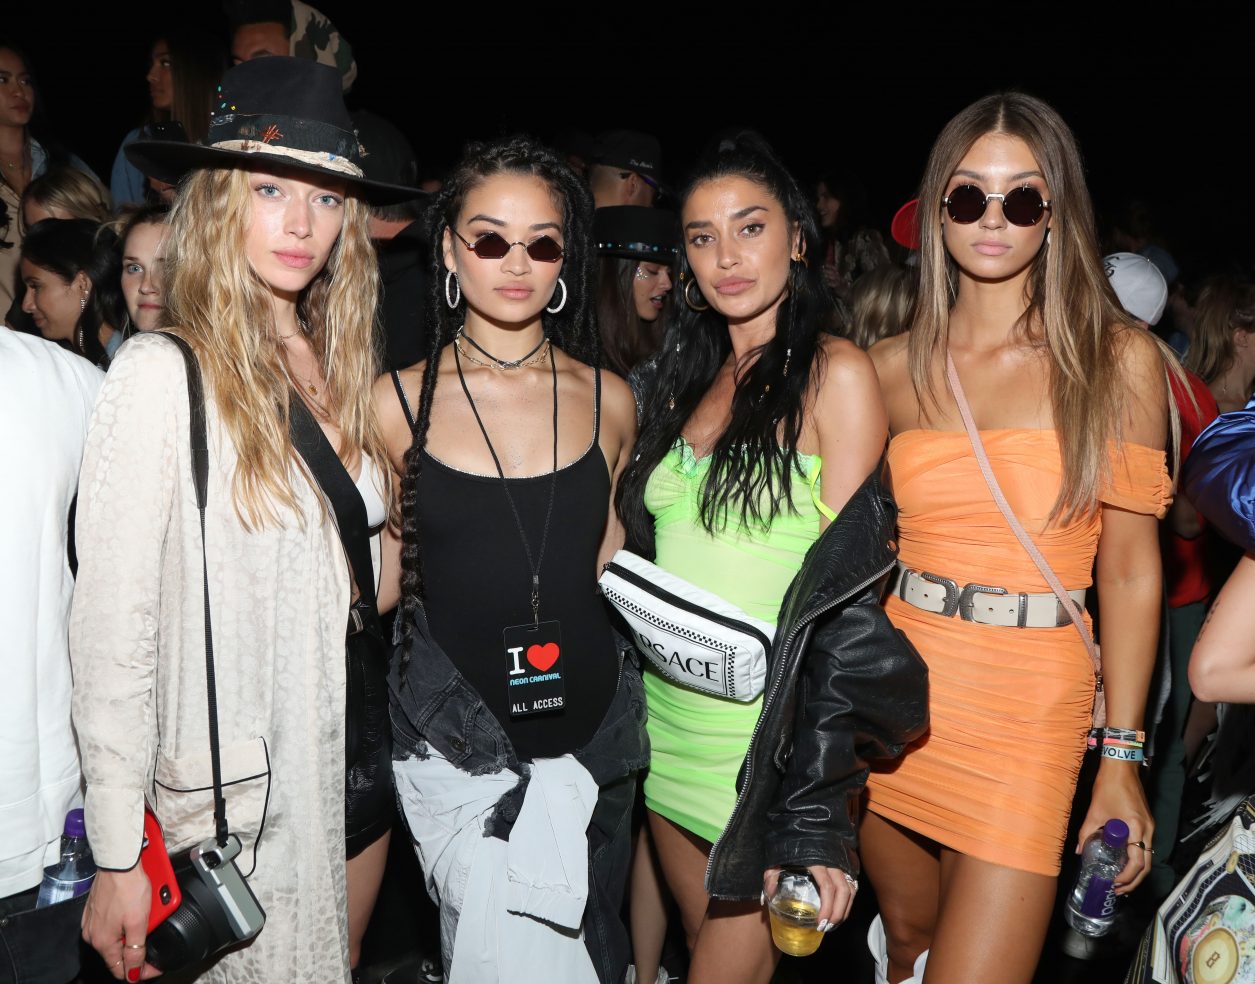 THERMAL, CALIFORNIA - APRIL 13: Shanina Shaik (2nd from (L), Nicole Williams (2nd from R) and guests attend the Levi's Brand Presents Neon Carnival with Bondi Sands and POKÉMON: Detective Pikachu on April 13, 2019 in Thermal, California. (Photo by Jerritt Clark/Getty Images for Neon Carnival)